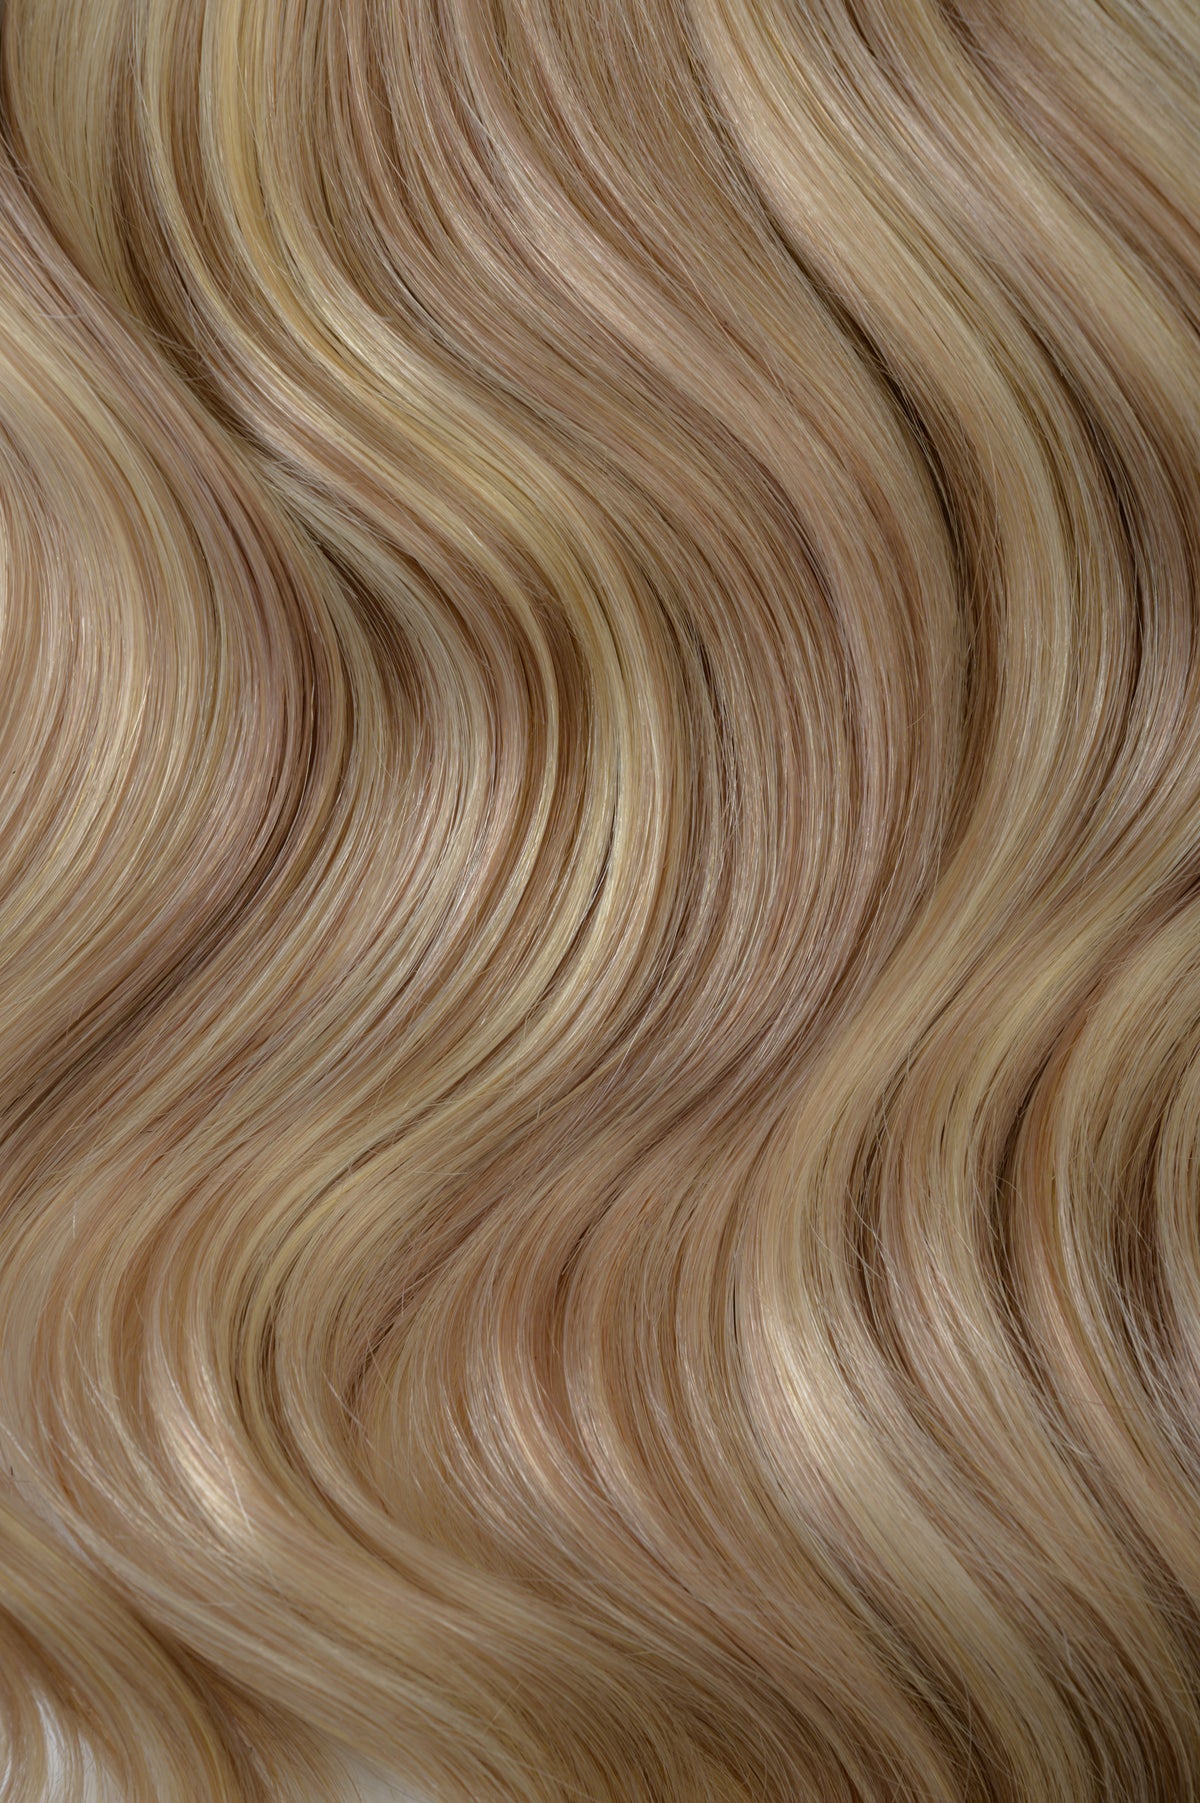 #18/613 Ash Blonde Highlights Traditional Weft Extensions